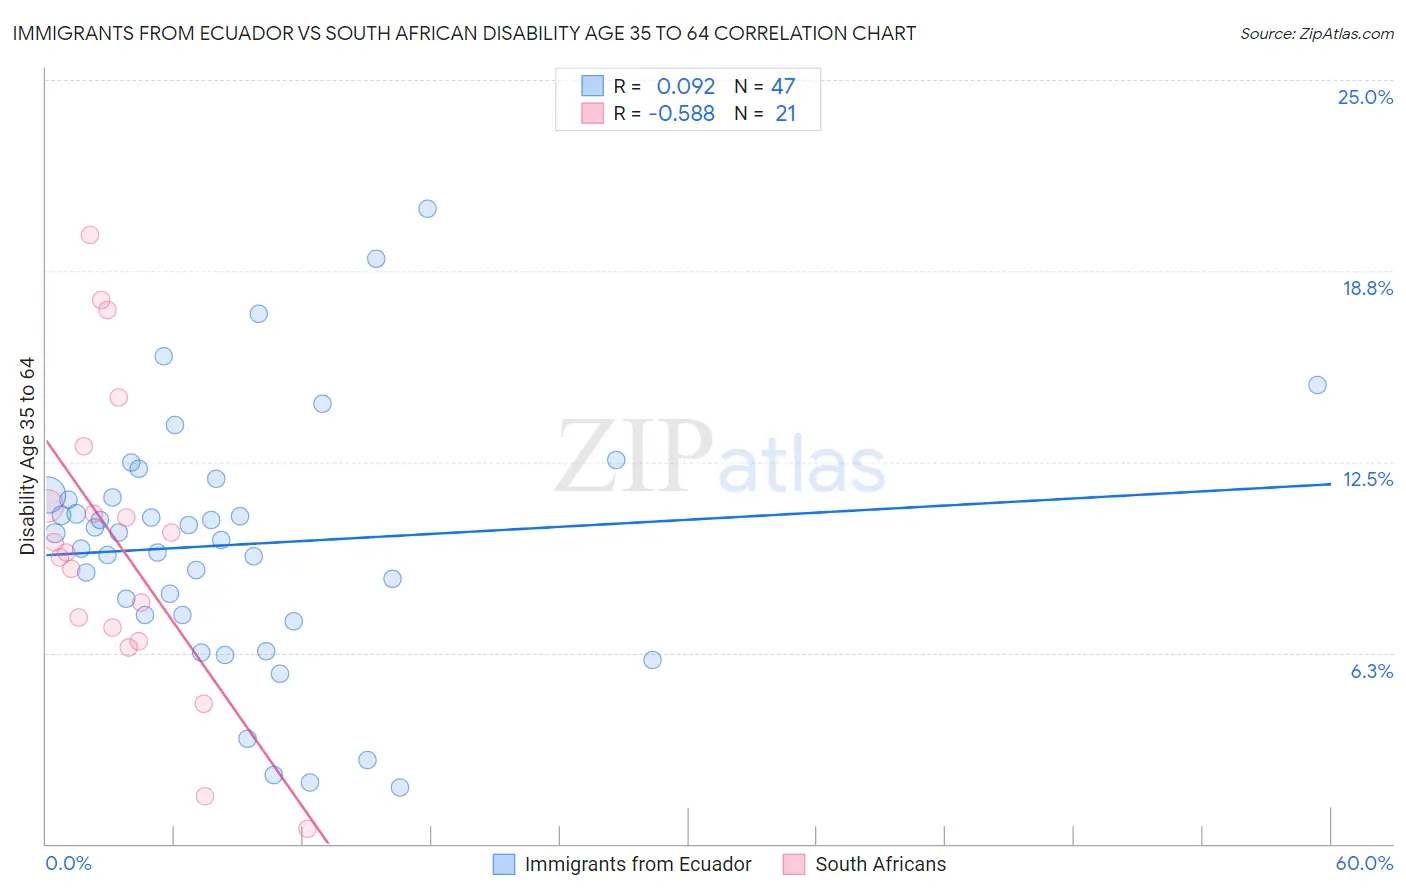 Immigrants from Ecuador vs South African Disability Age 35 to 64